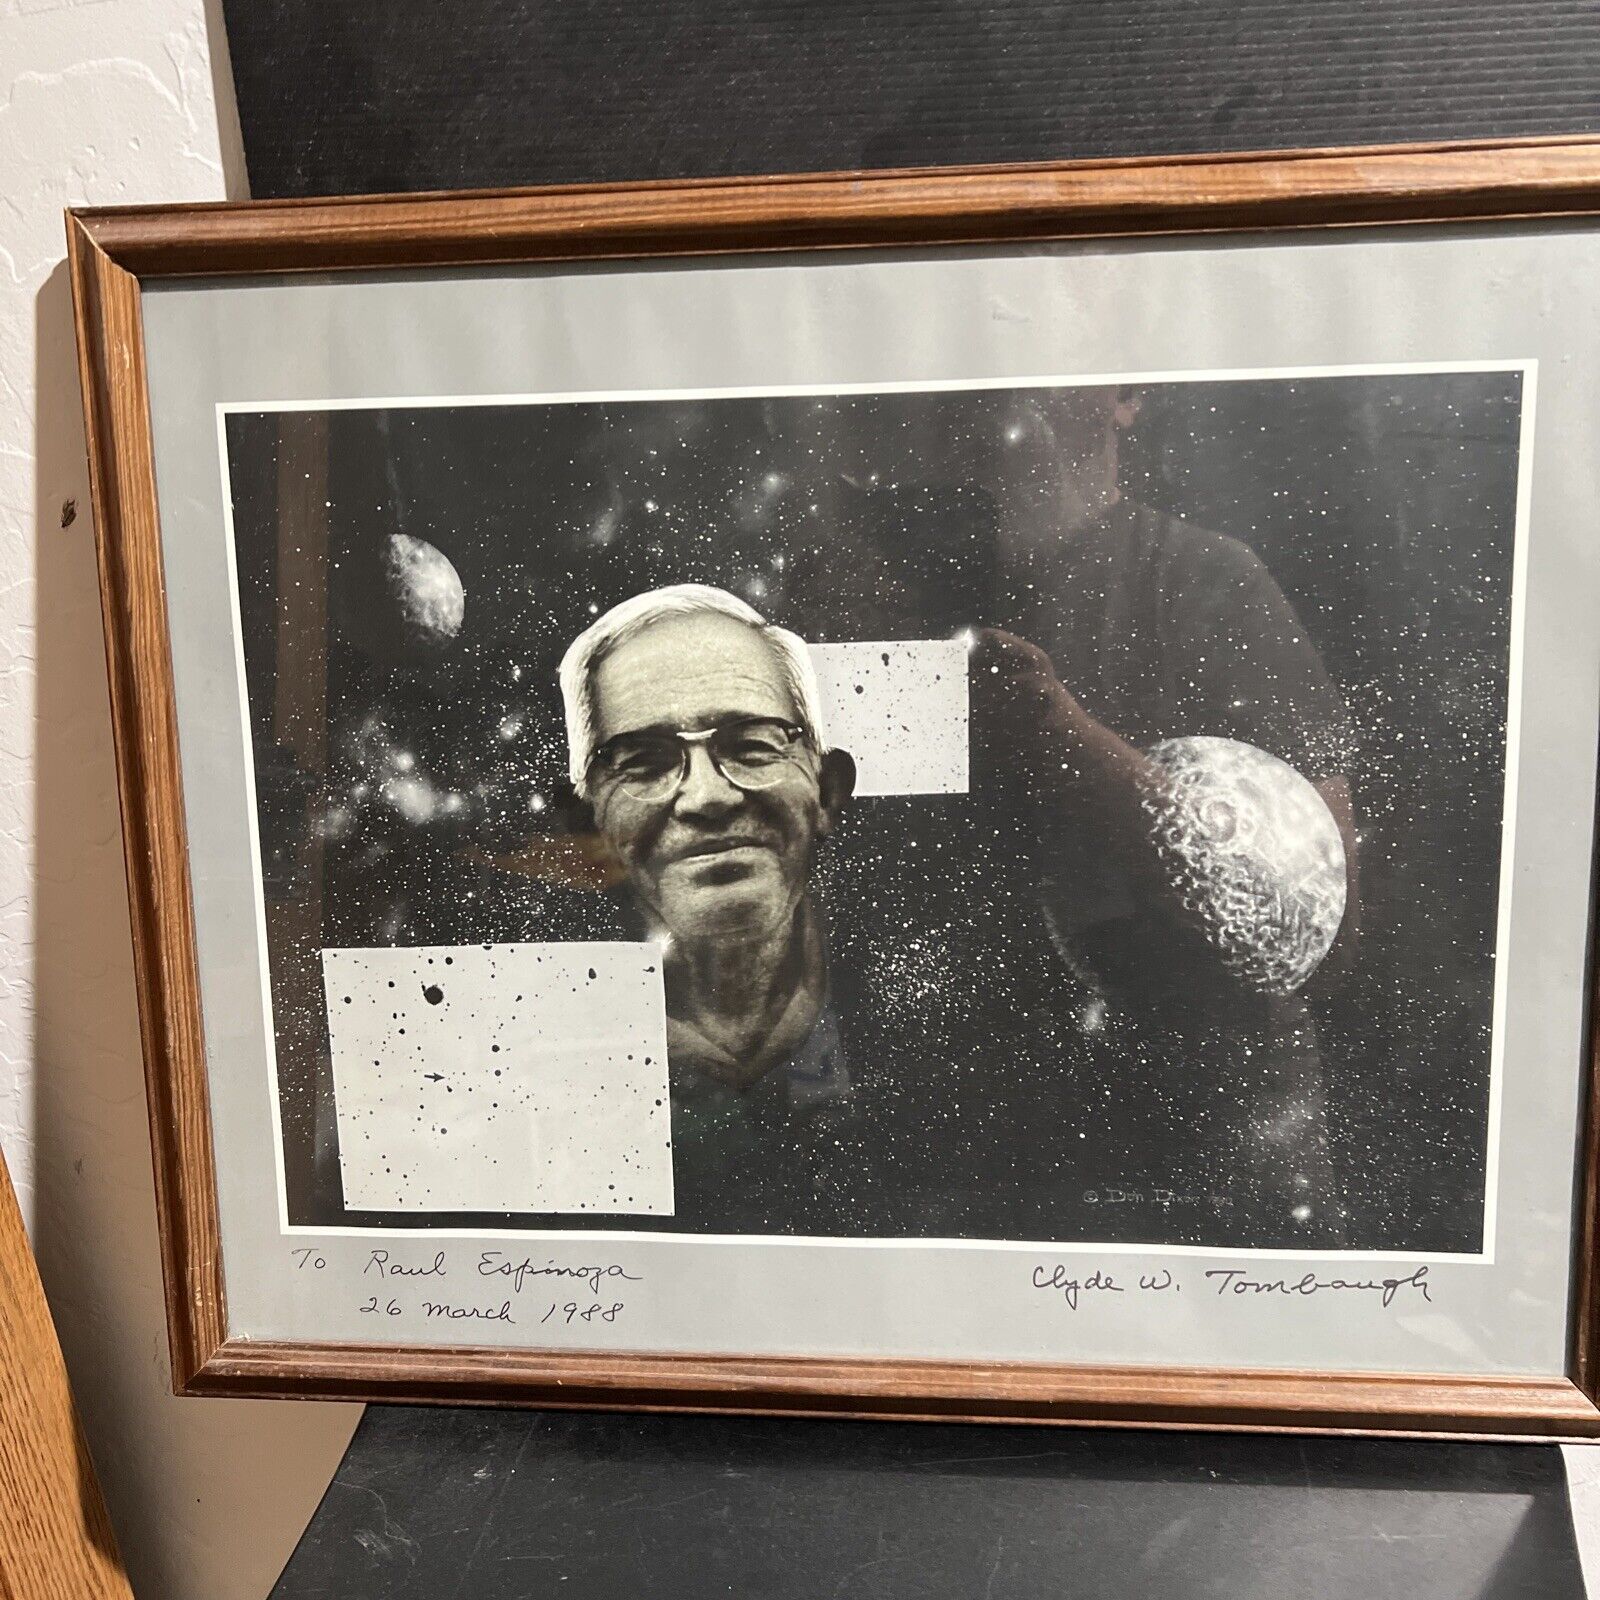 Framed SIGNED Clyde Tombaugh Photo of the 9th Planet, Pluto 21 1/2” x 17 1/2”